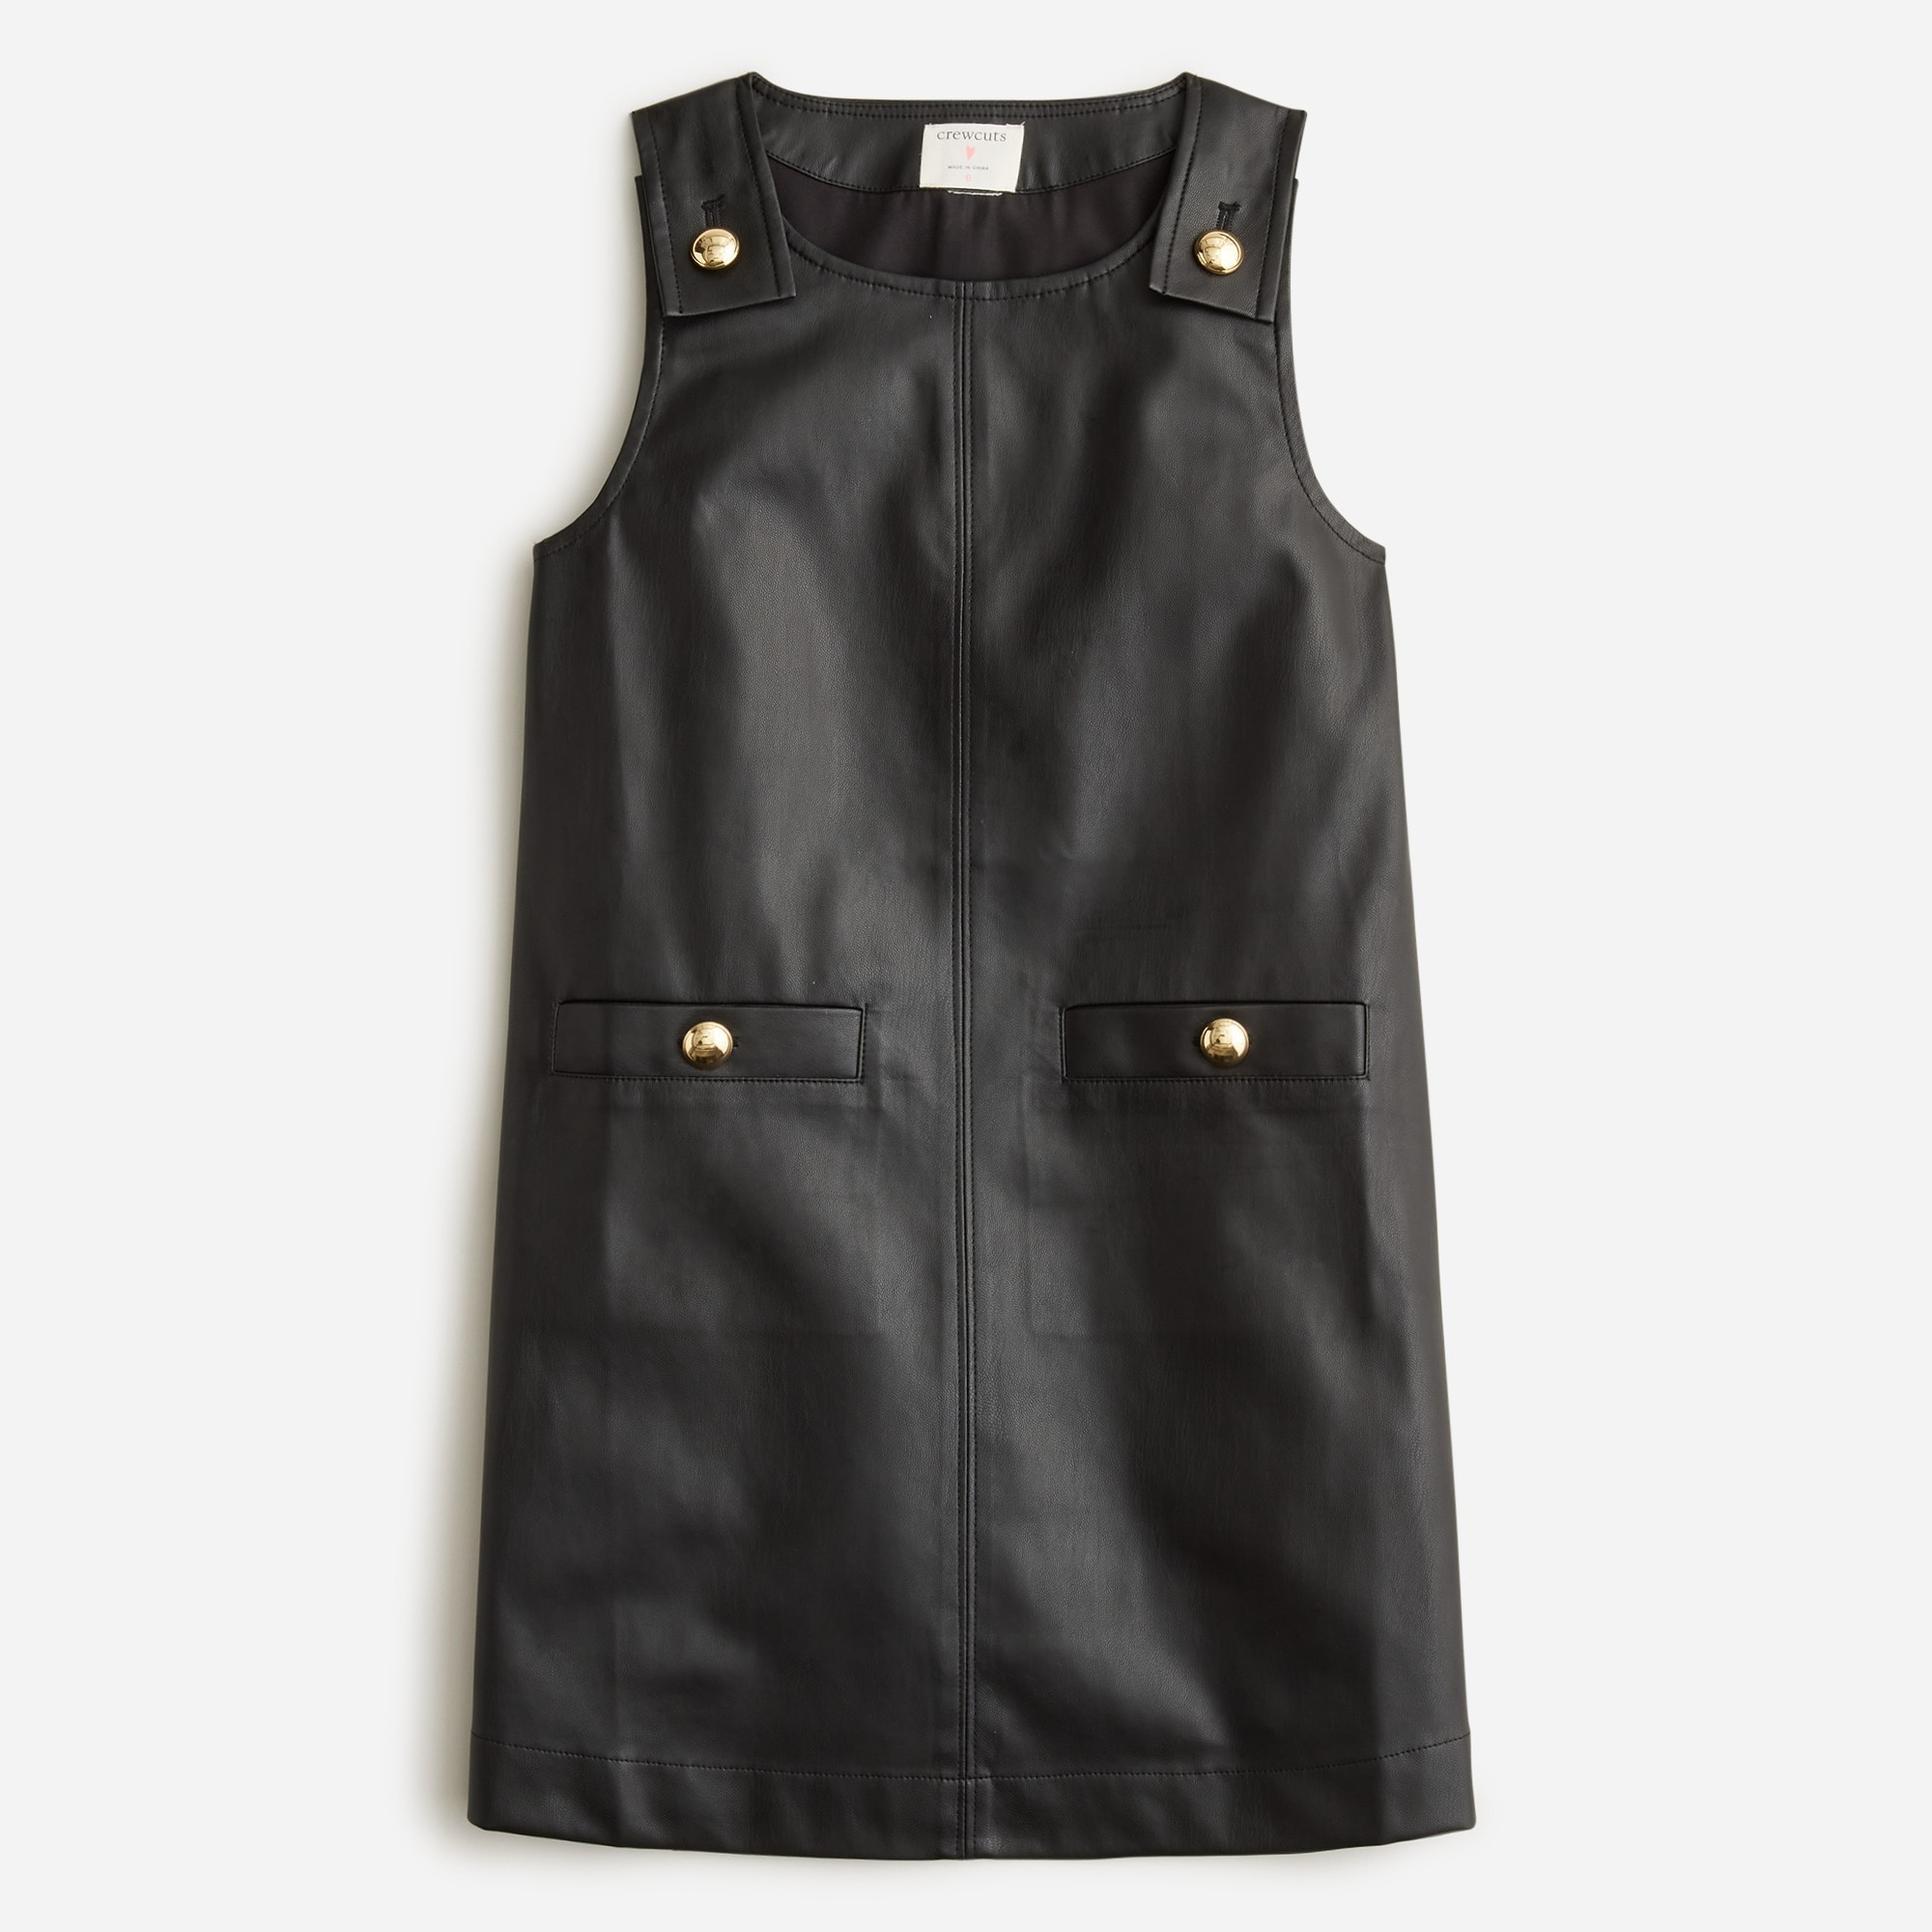  Girls' button-strap dress in faux leather